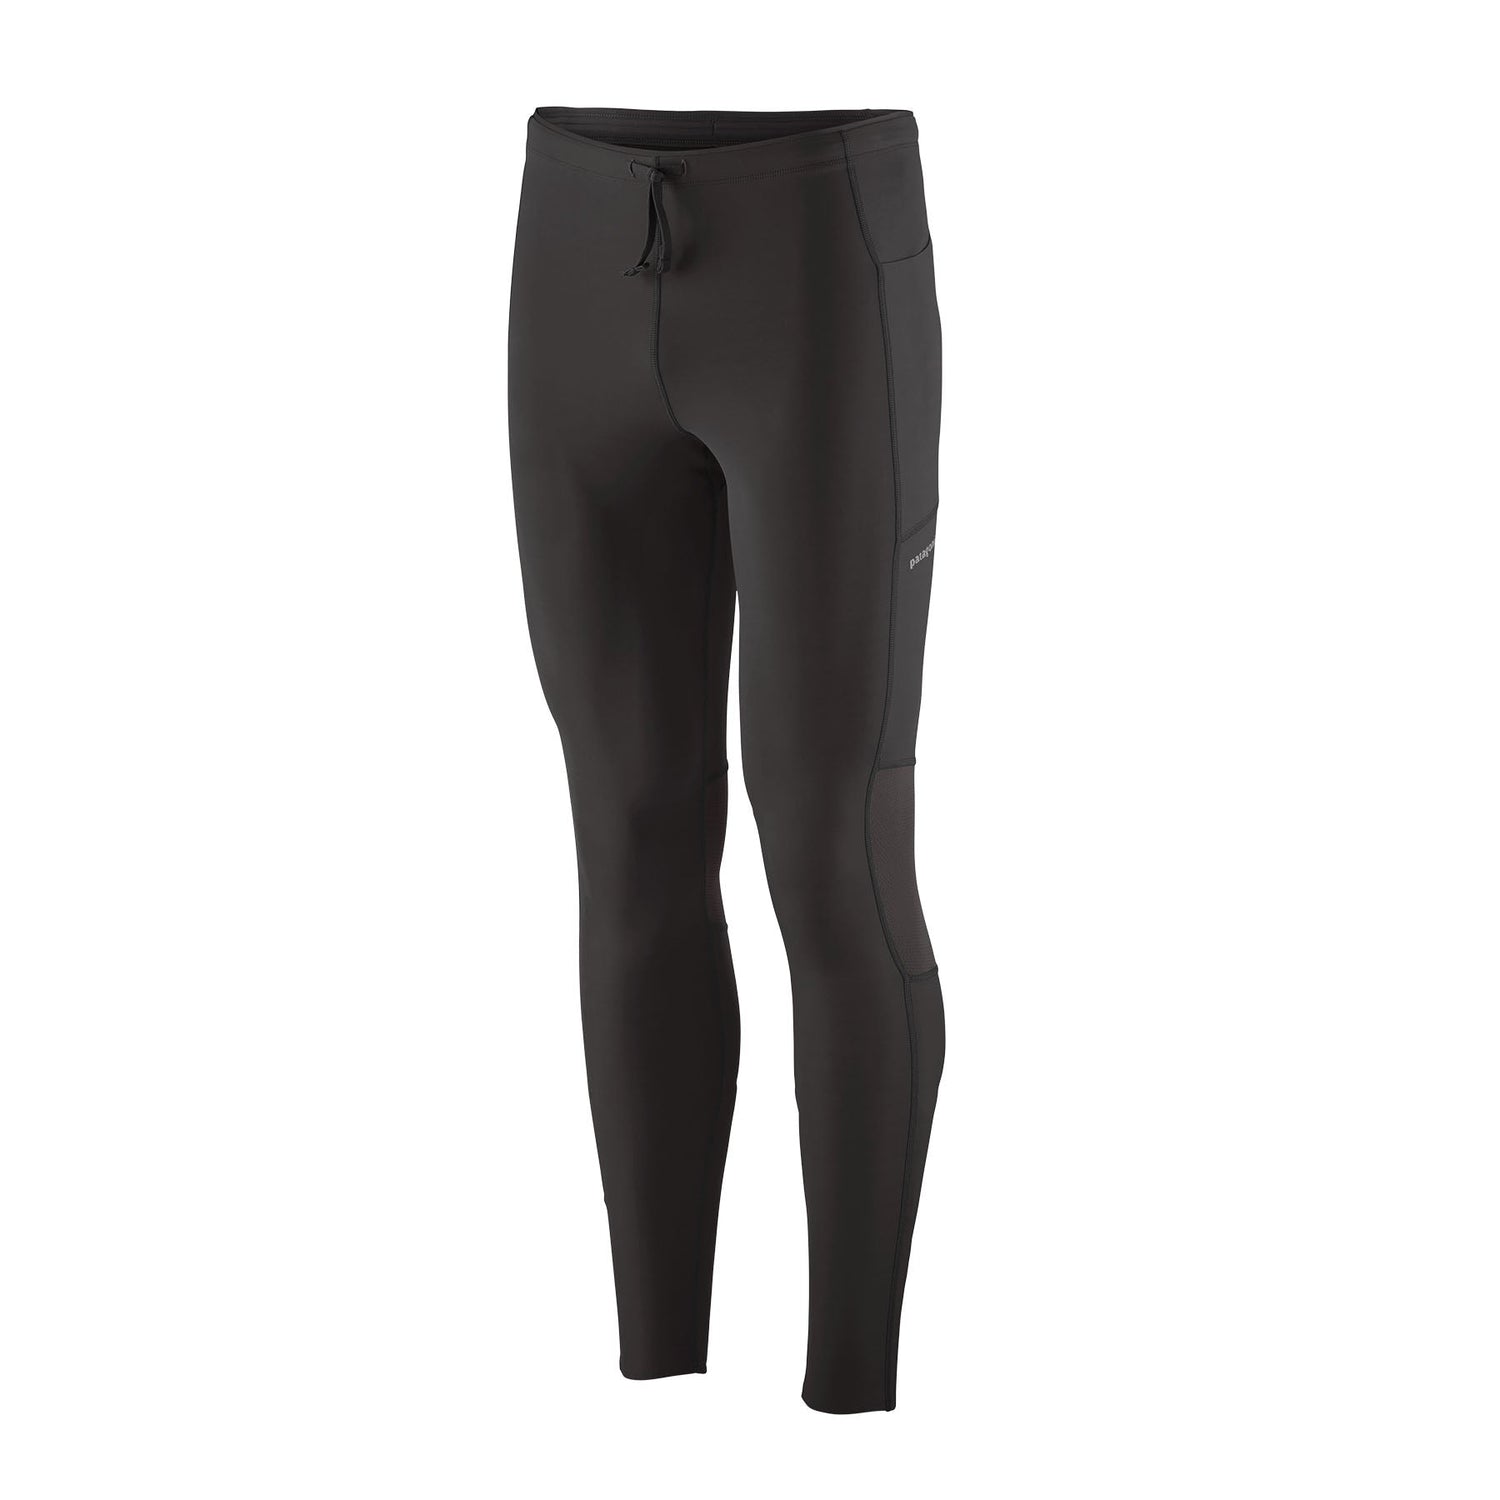 Patagonia - M's Endless Run Tights - Recycled nylon - Weekendbee - sustainable sportswear